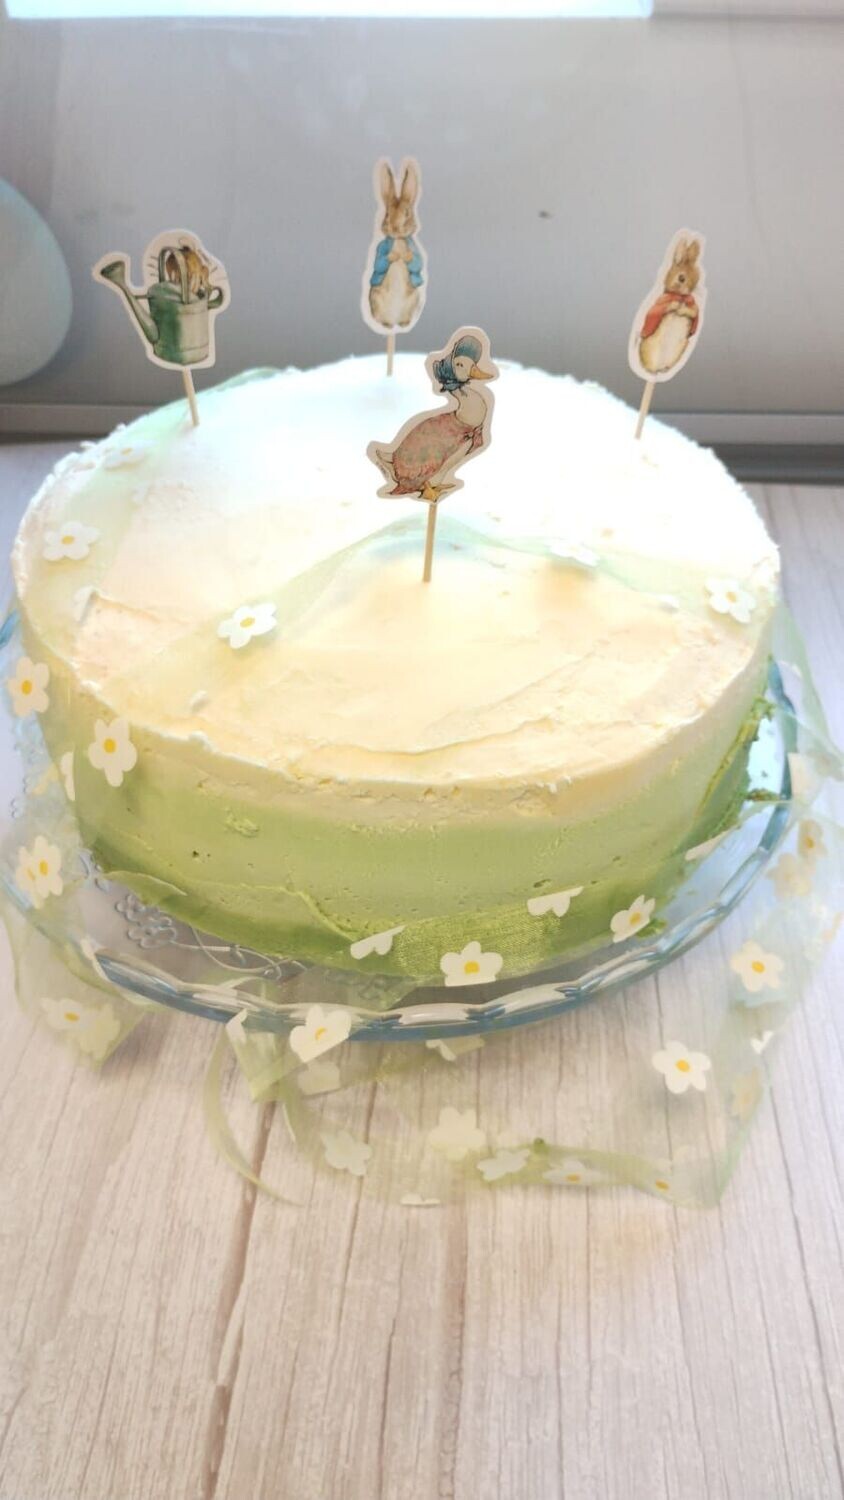 Large Cake with specific icing/decorations